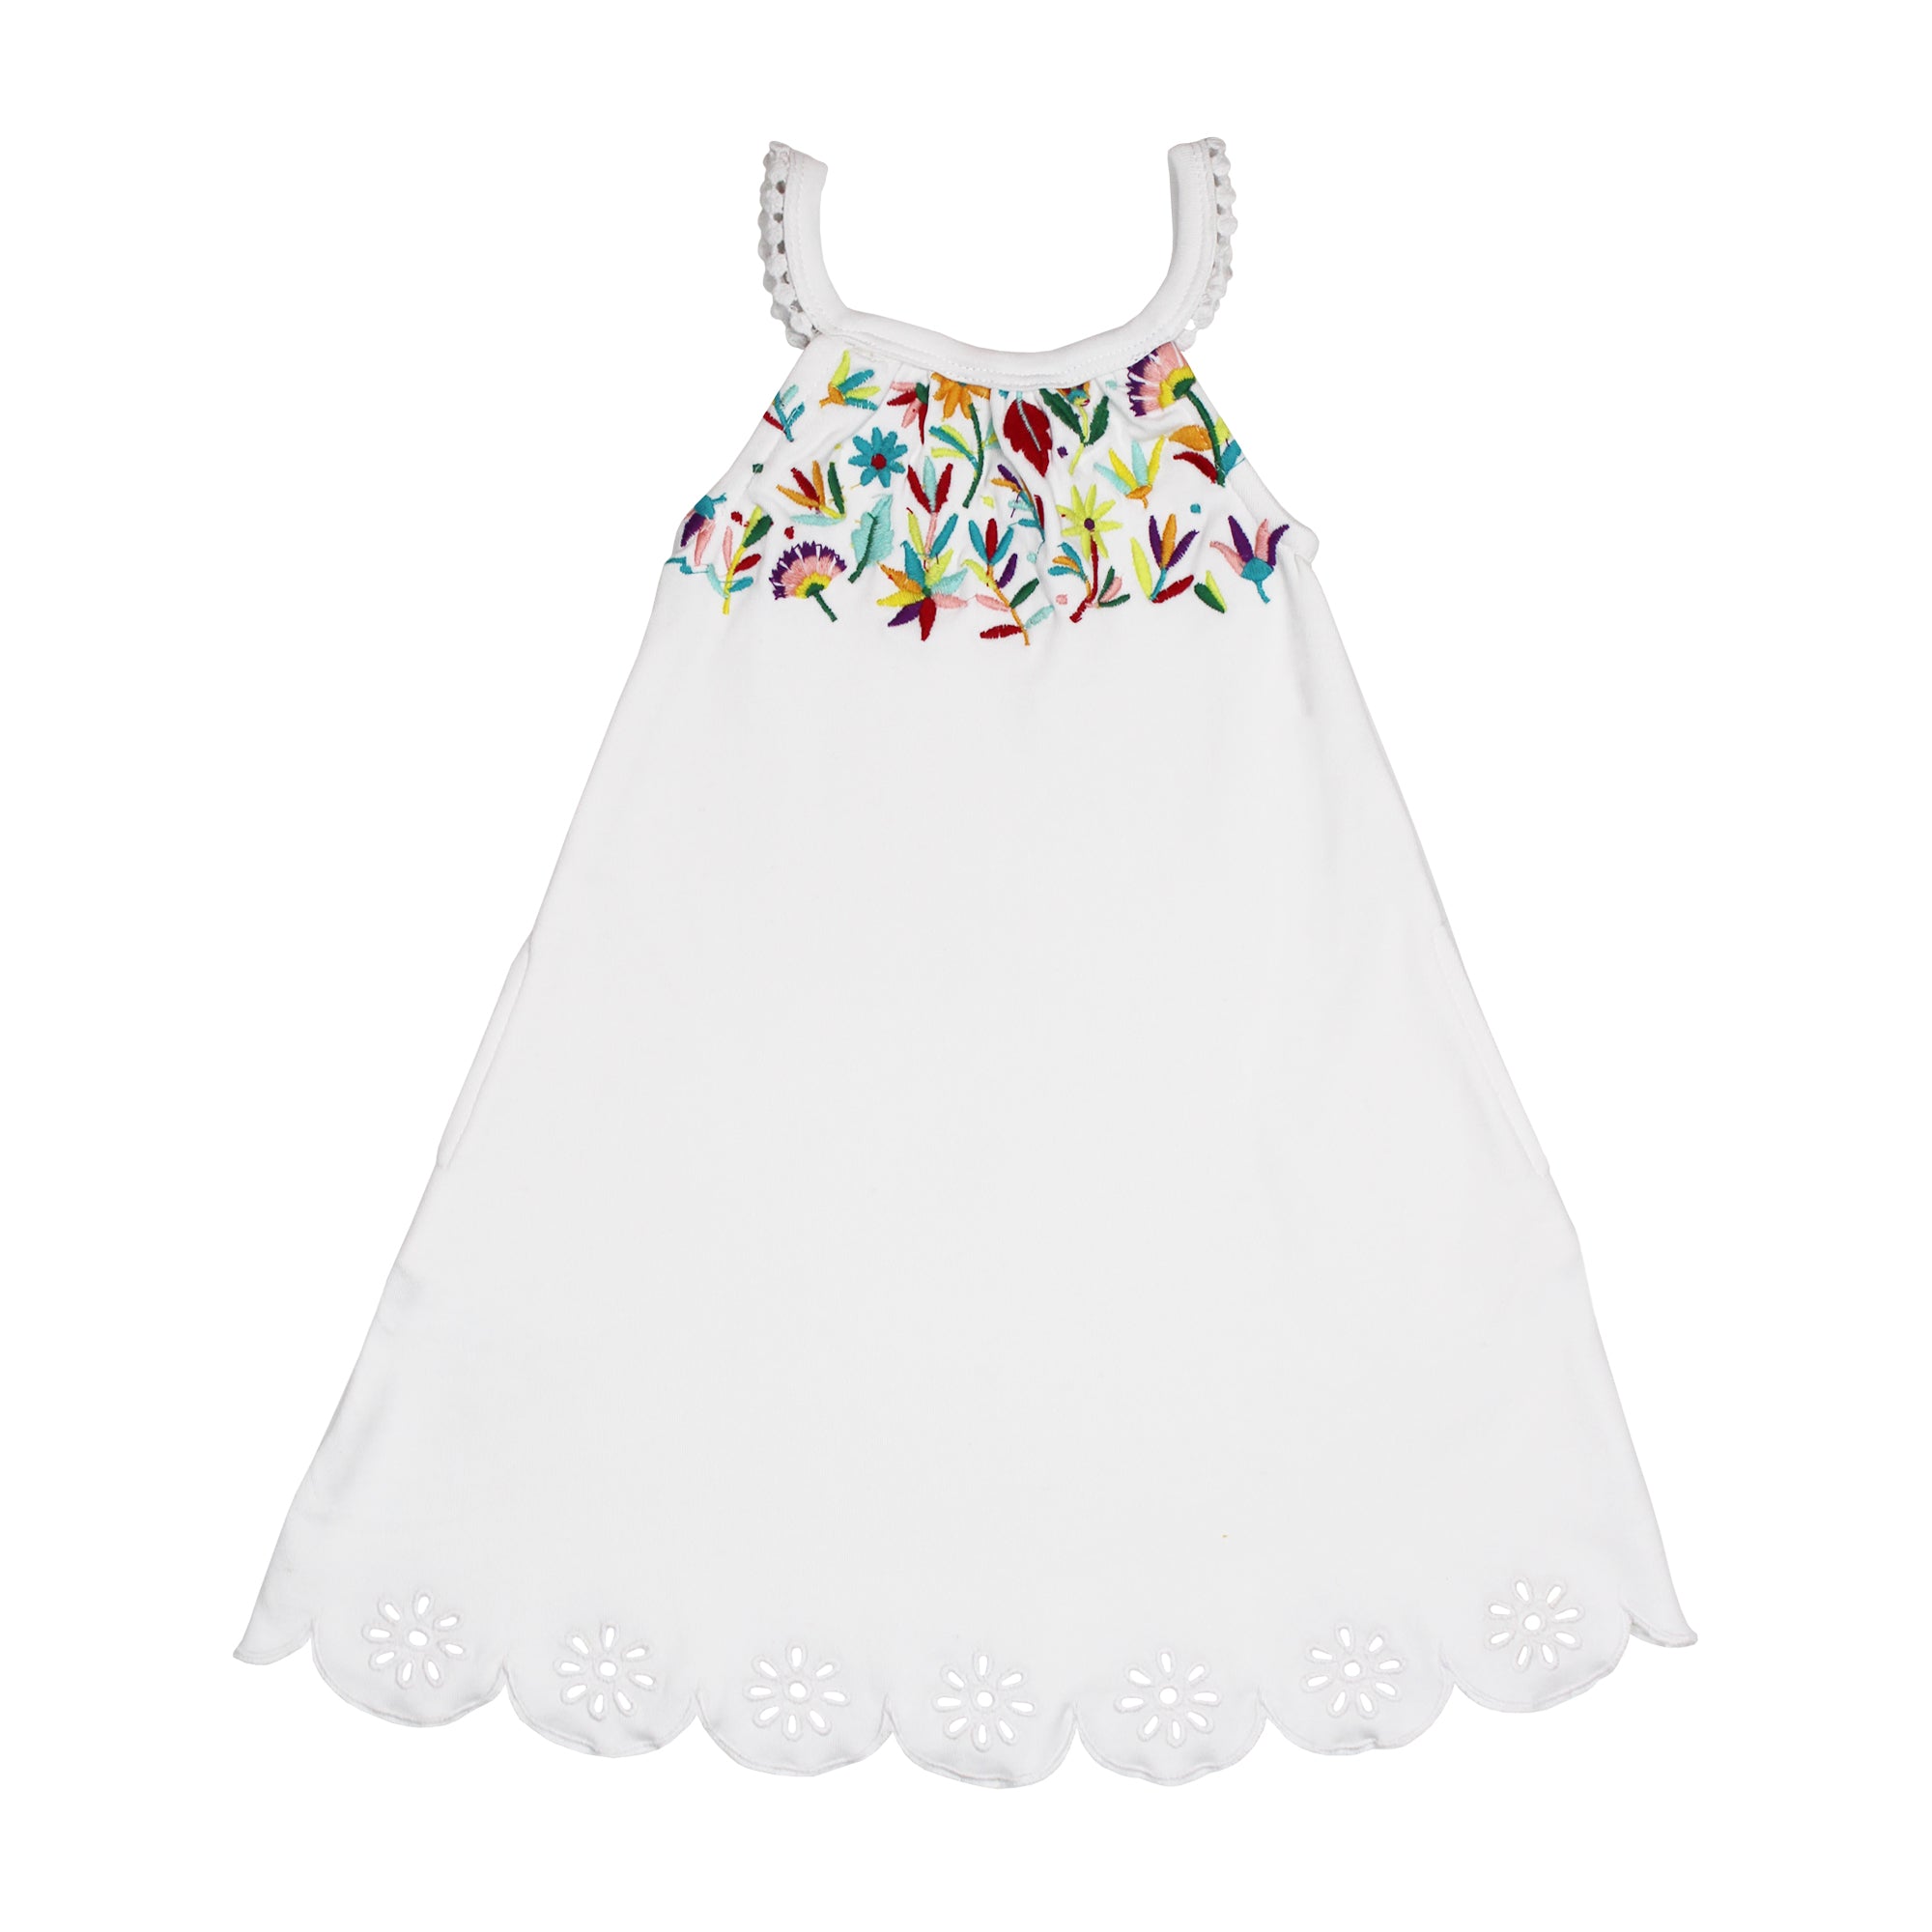 L'ovedbaby Kids' Embroidered Twirl Dress with Pockets